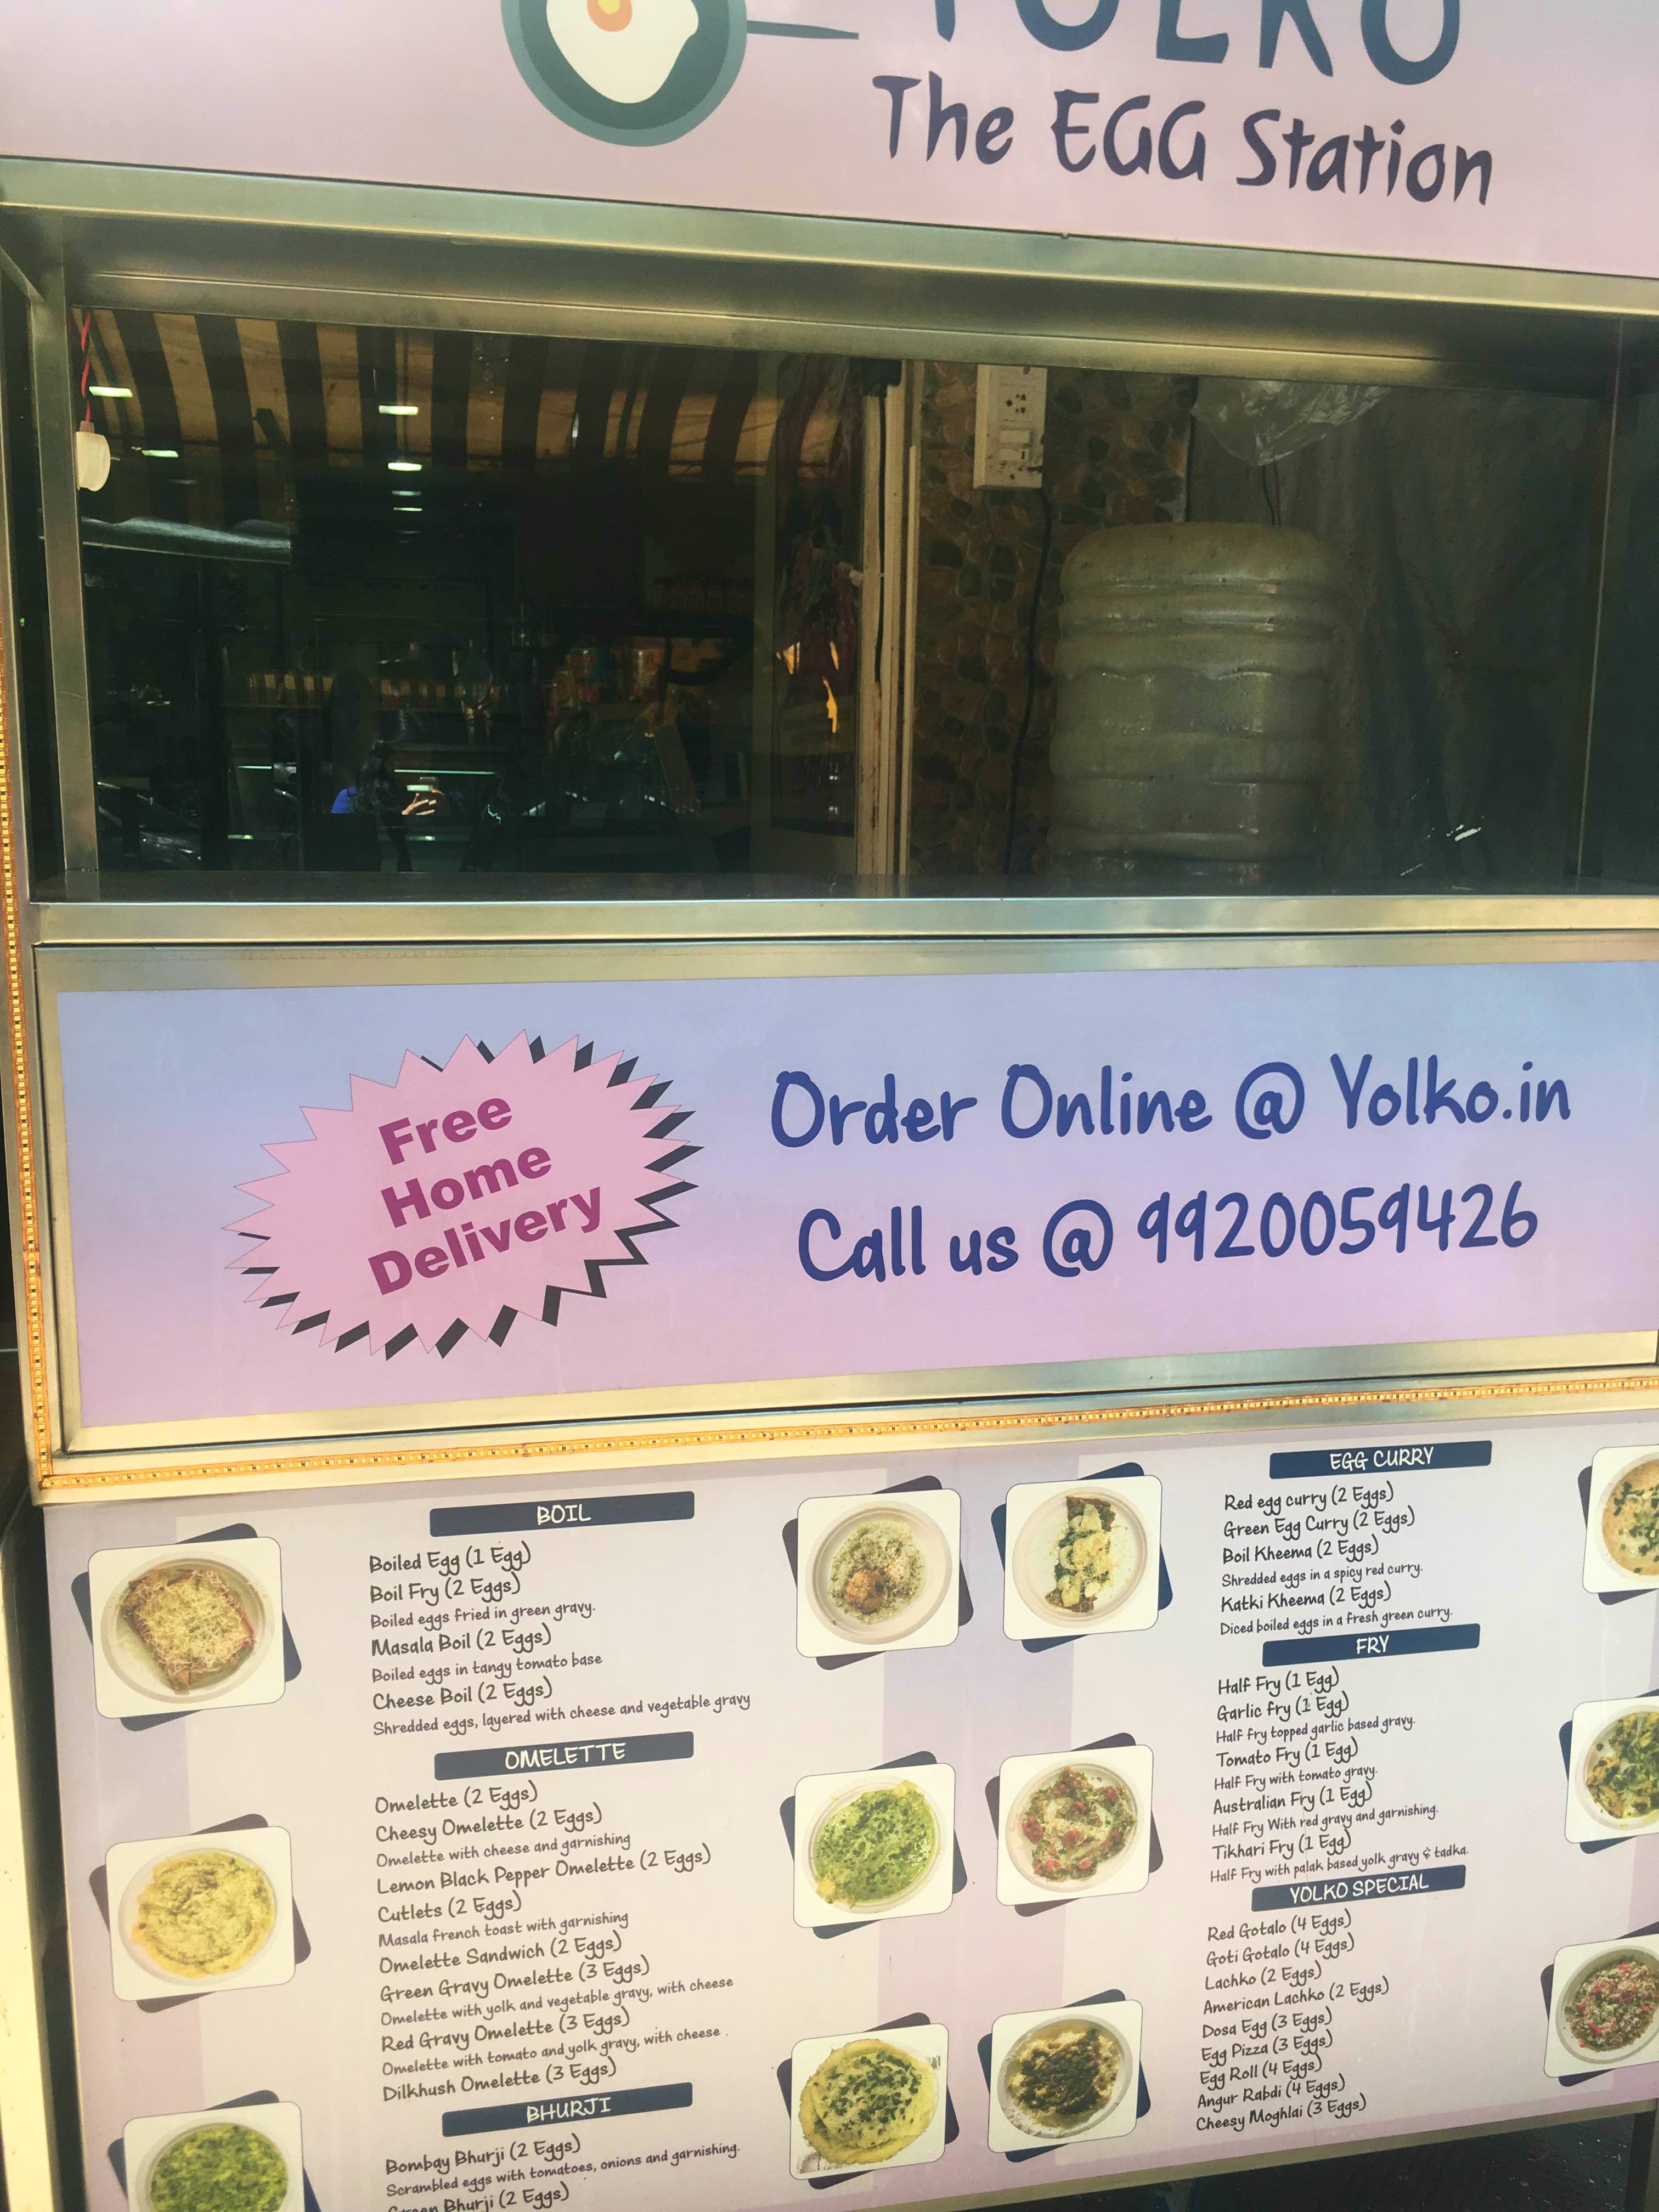 Powai residents, Yolko is here to get you Eggcited!